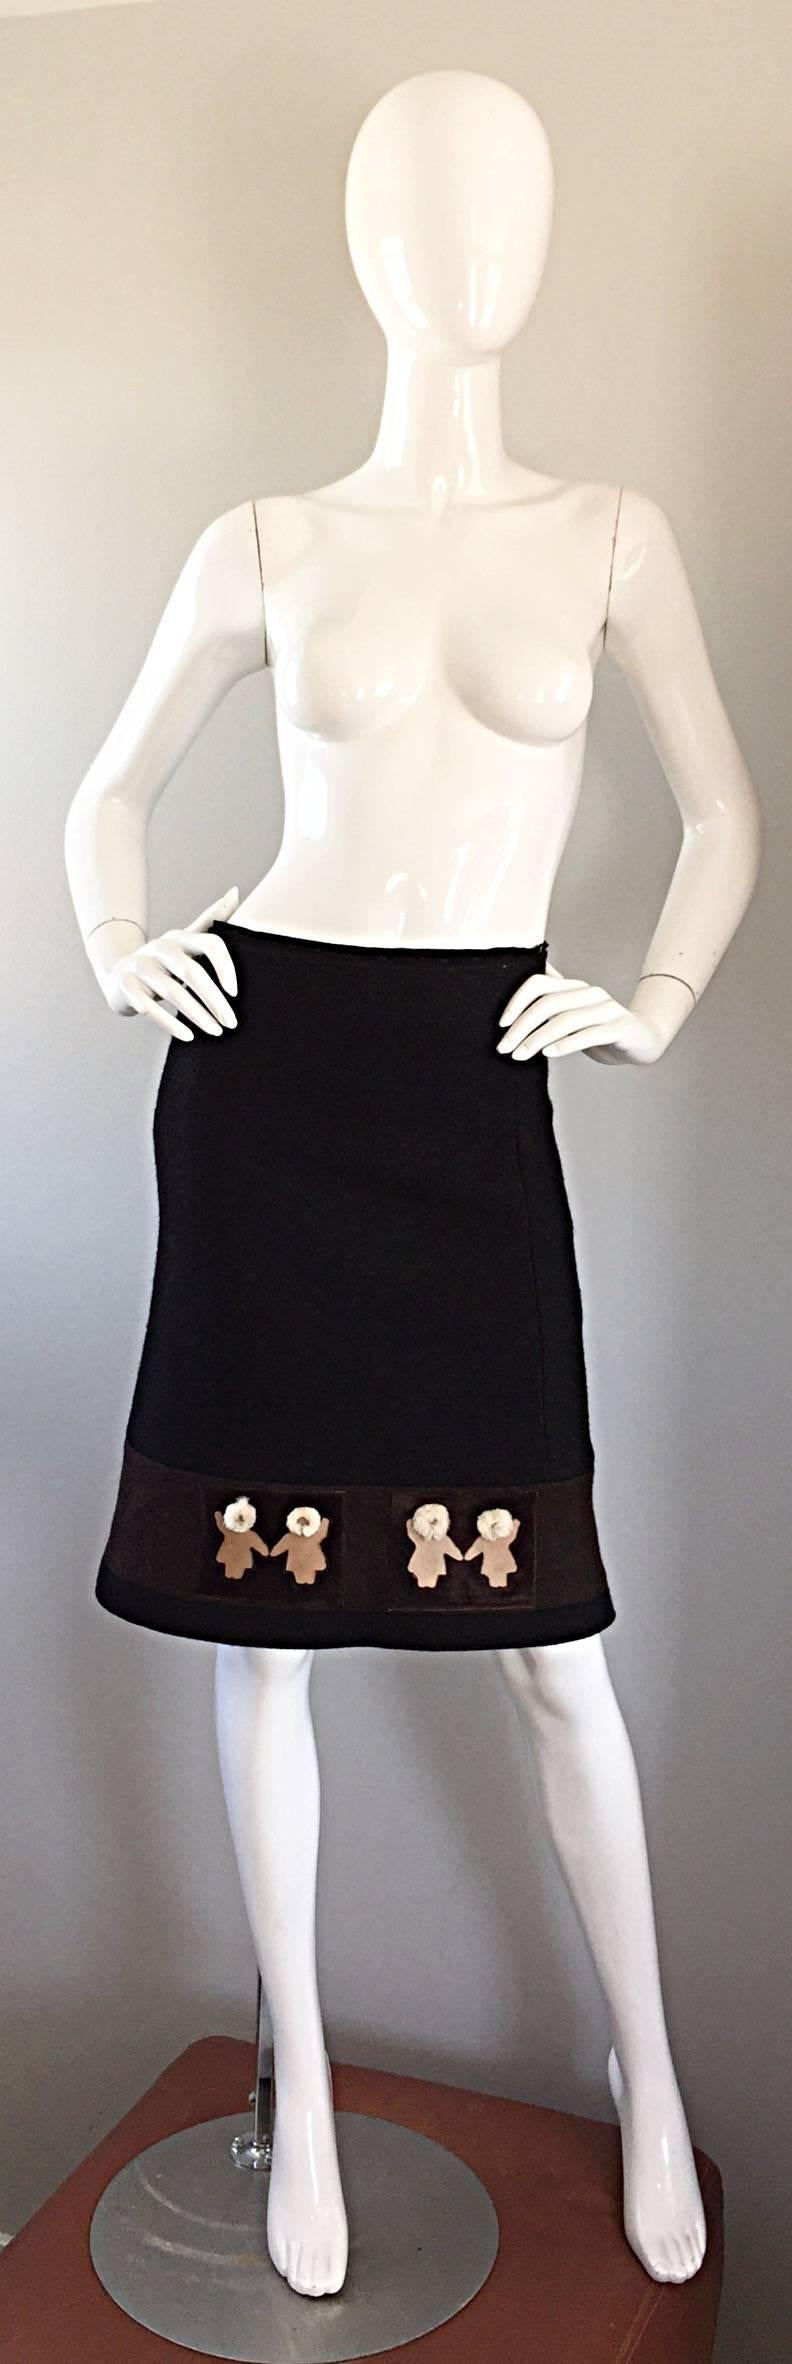 Chic 1990s PRADA black and brown novelty pencil skirt! Black wool, with a horizontal brown stripe at hem, and four adorable ivory and tan Eskimo appliqués. Figure flattering / body huggin fit, with a slight flared hem. Hidden zipper up the side with